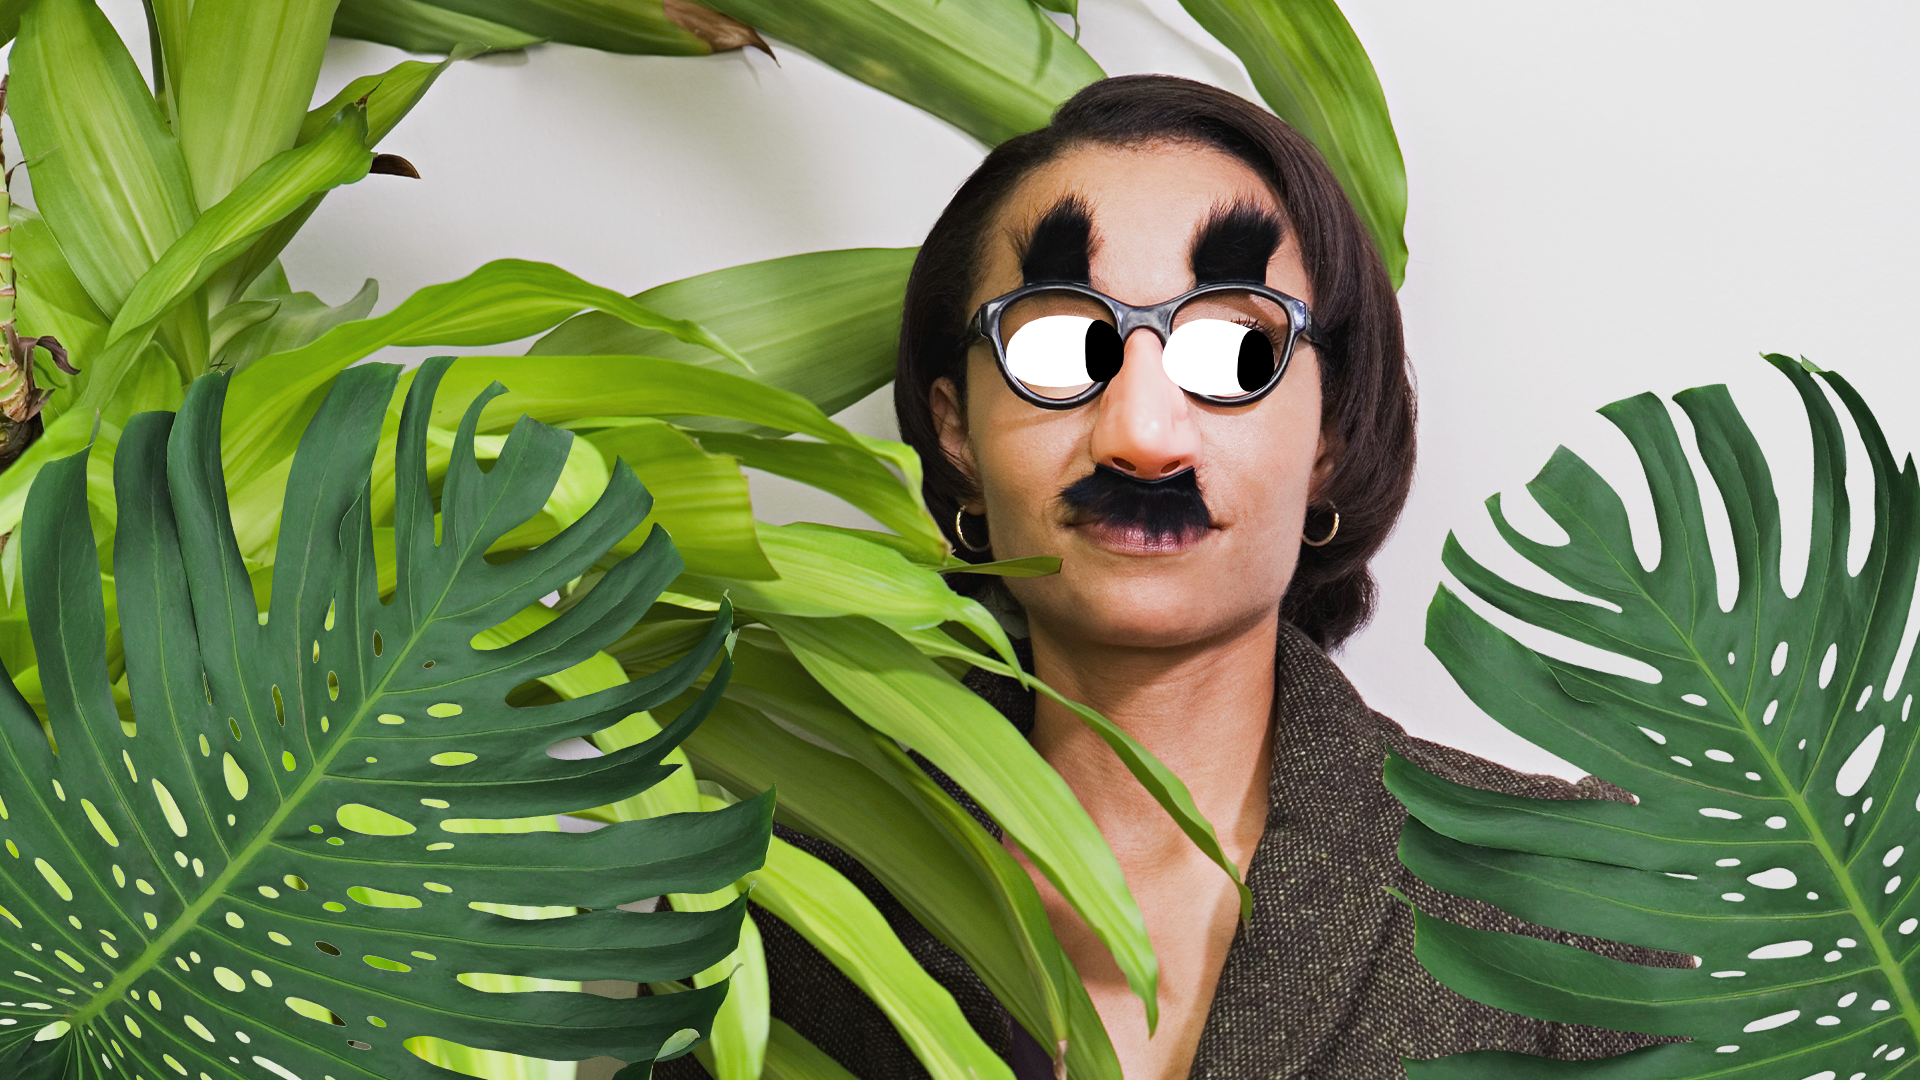 Woman with disguise hiding in bushes